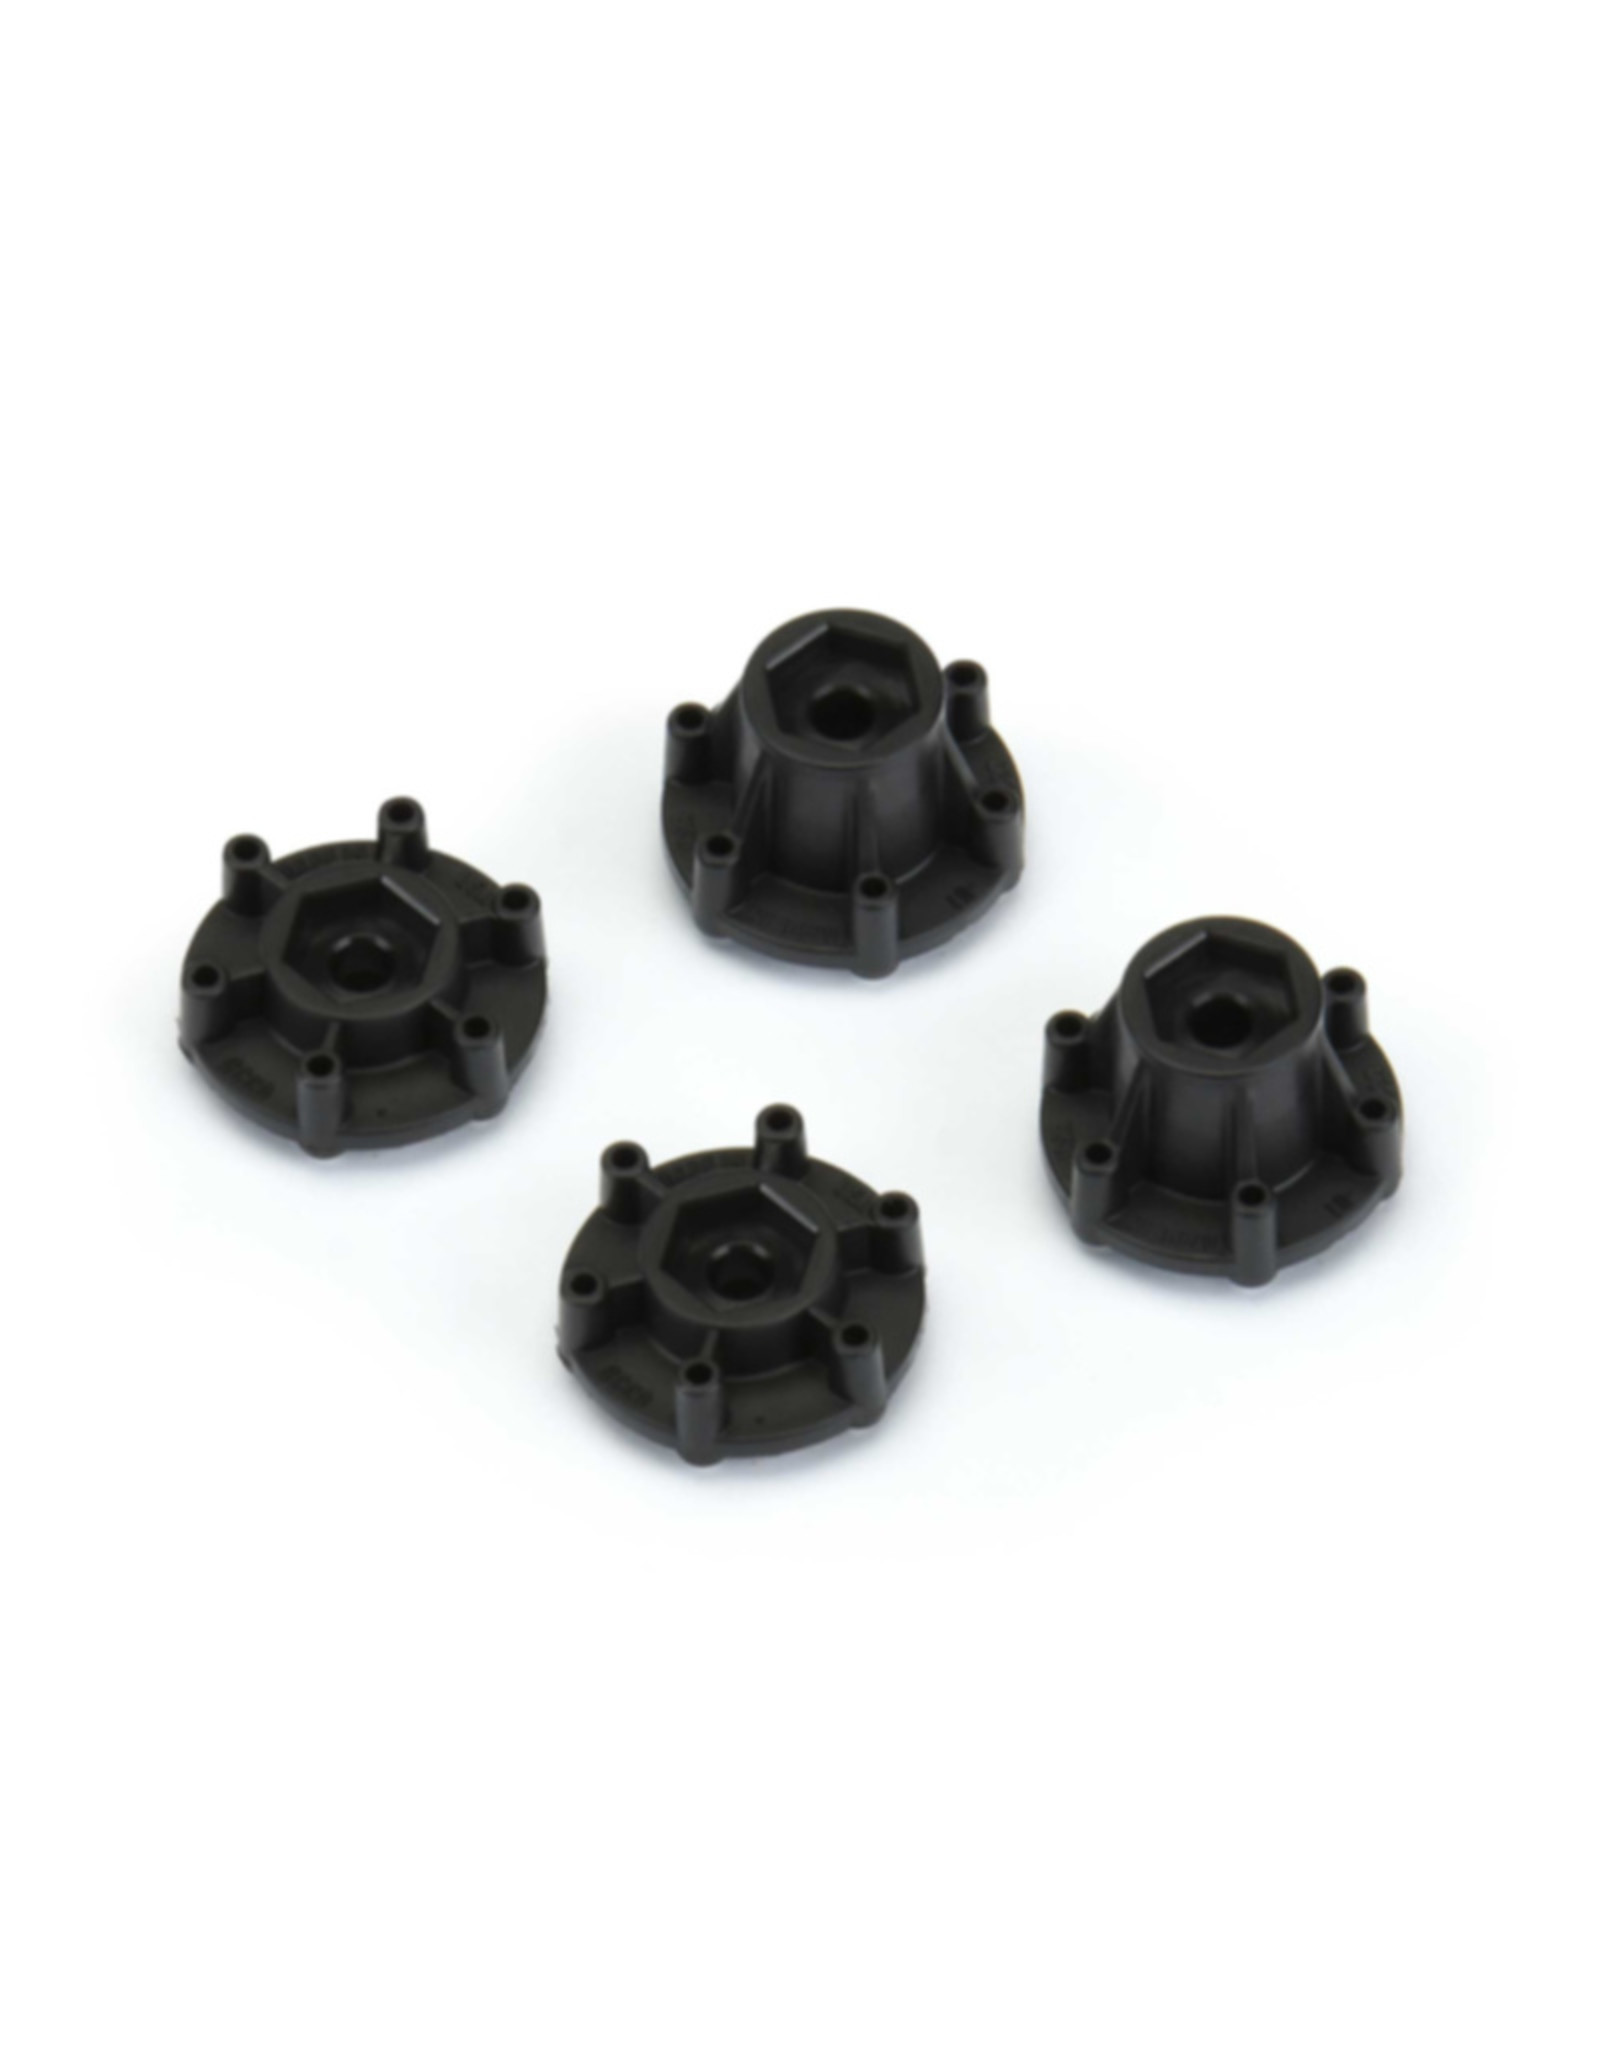 Pro-Line Racing PRO633500  6x30 to 12mm Hex Adapters (Nrw&Wde) for 6x30 Whls